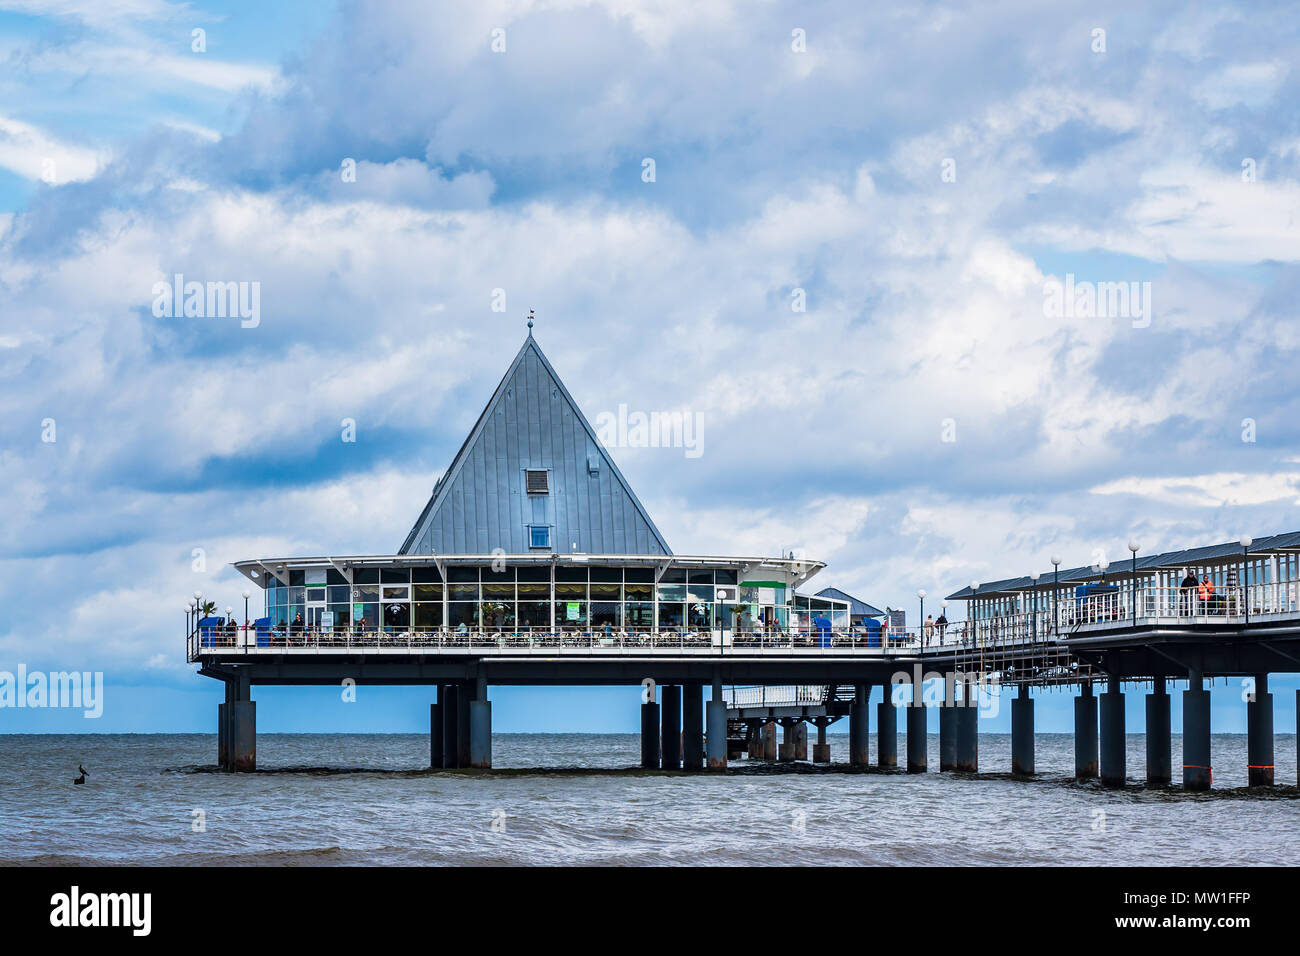 The pier in Heringsdorf on the island Usedom, Germany. Stock Photo